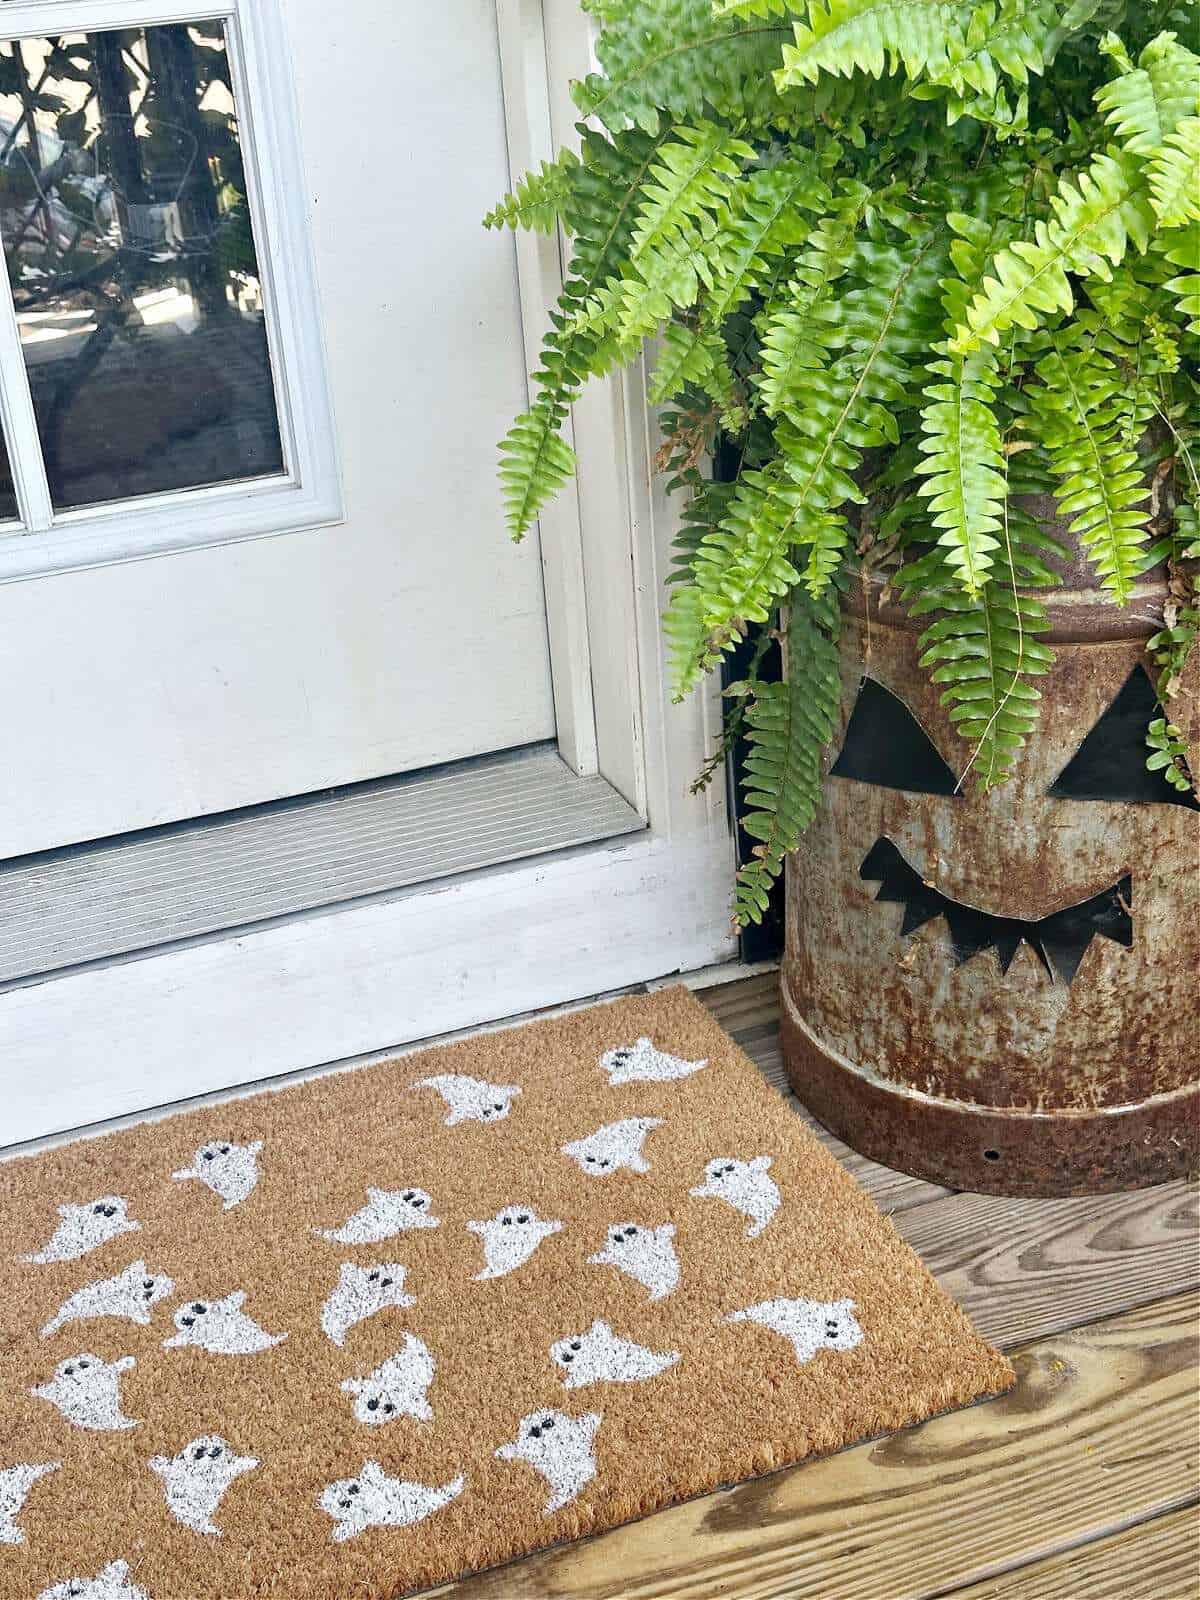 How to Make a Cute Painted Ghost Halloween Doormat For $10!